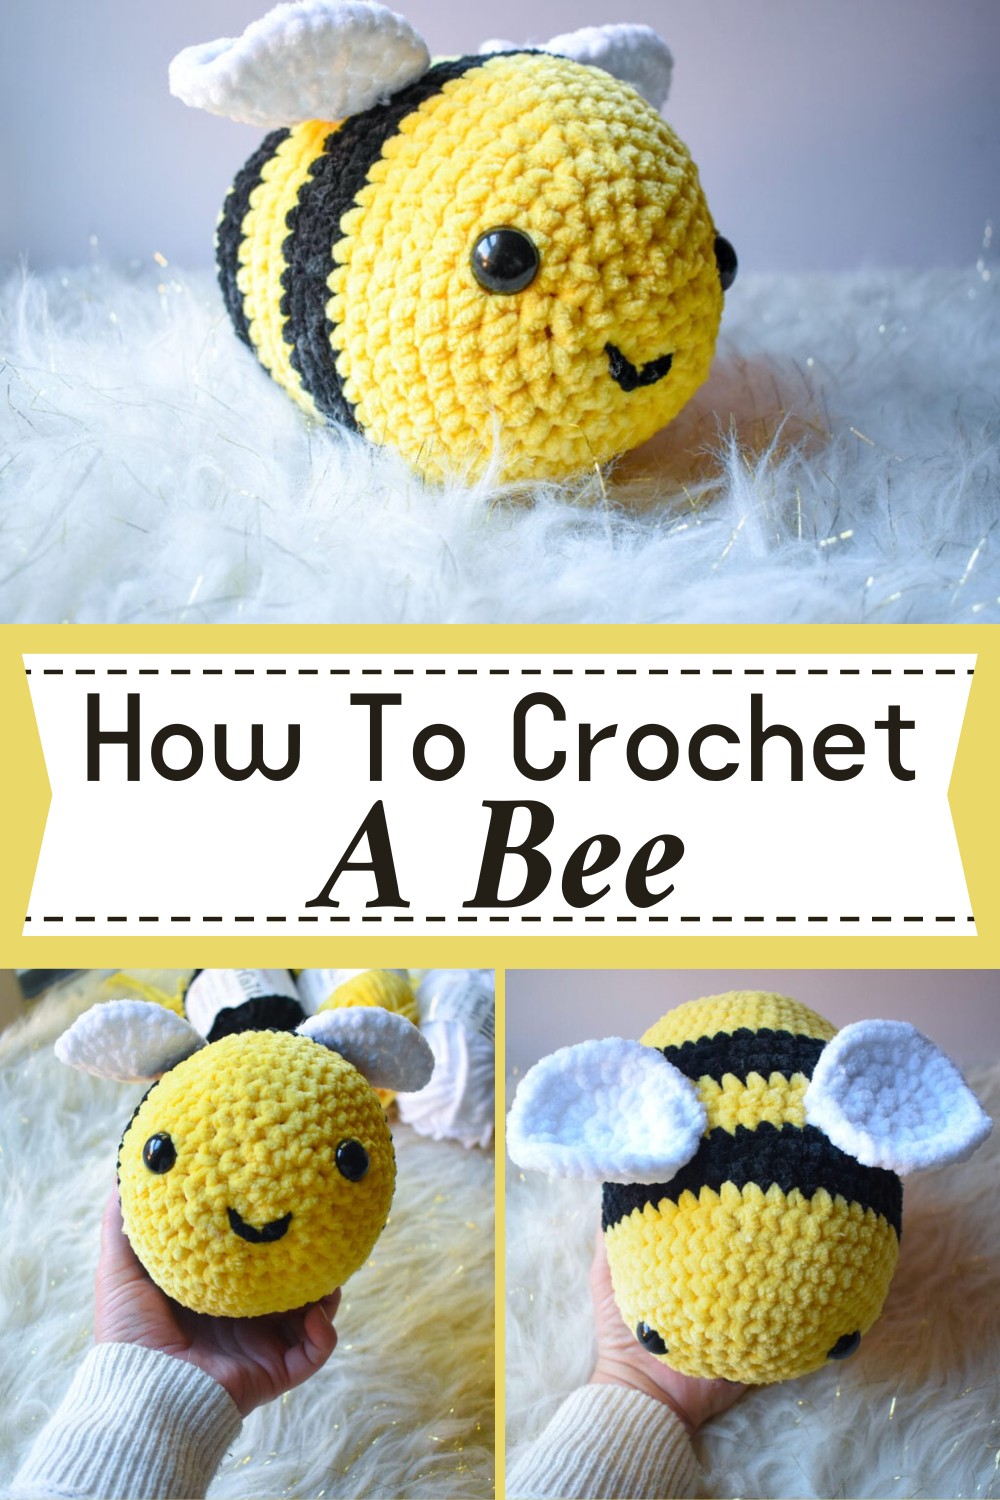 How To Crochet A Bee